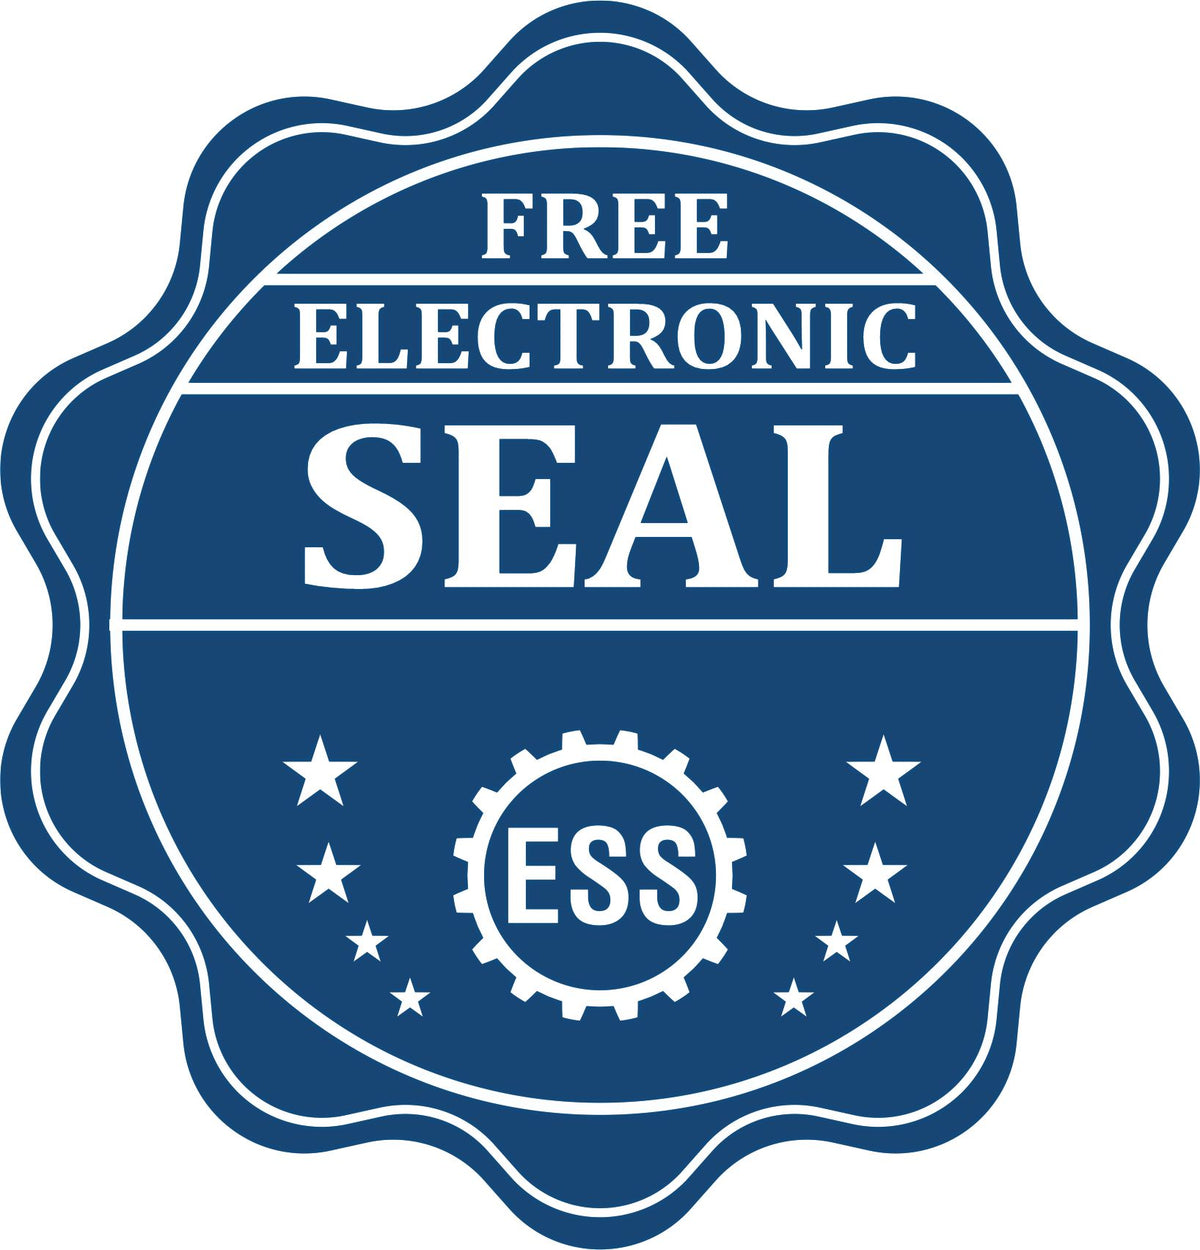 A badge showing a free electronic seal for the Super Slim Alabama Notary Public Stamp with stars and the ESS gear on the emblem.